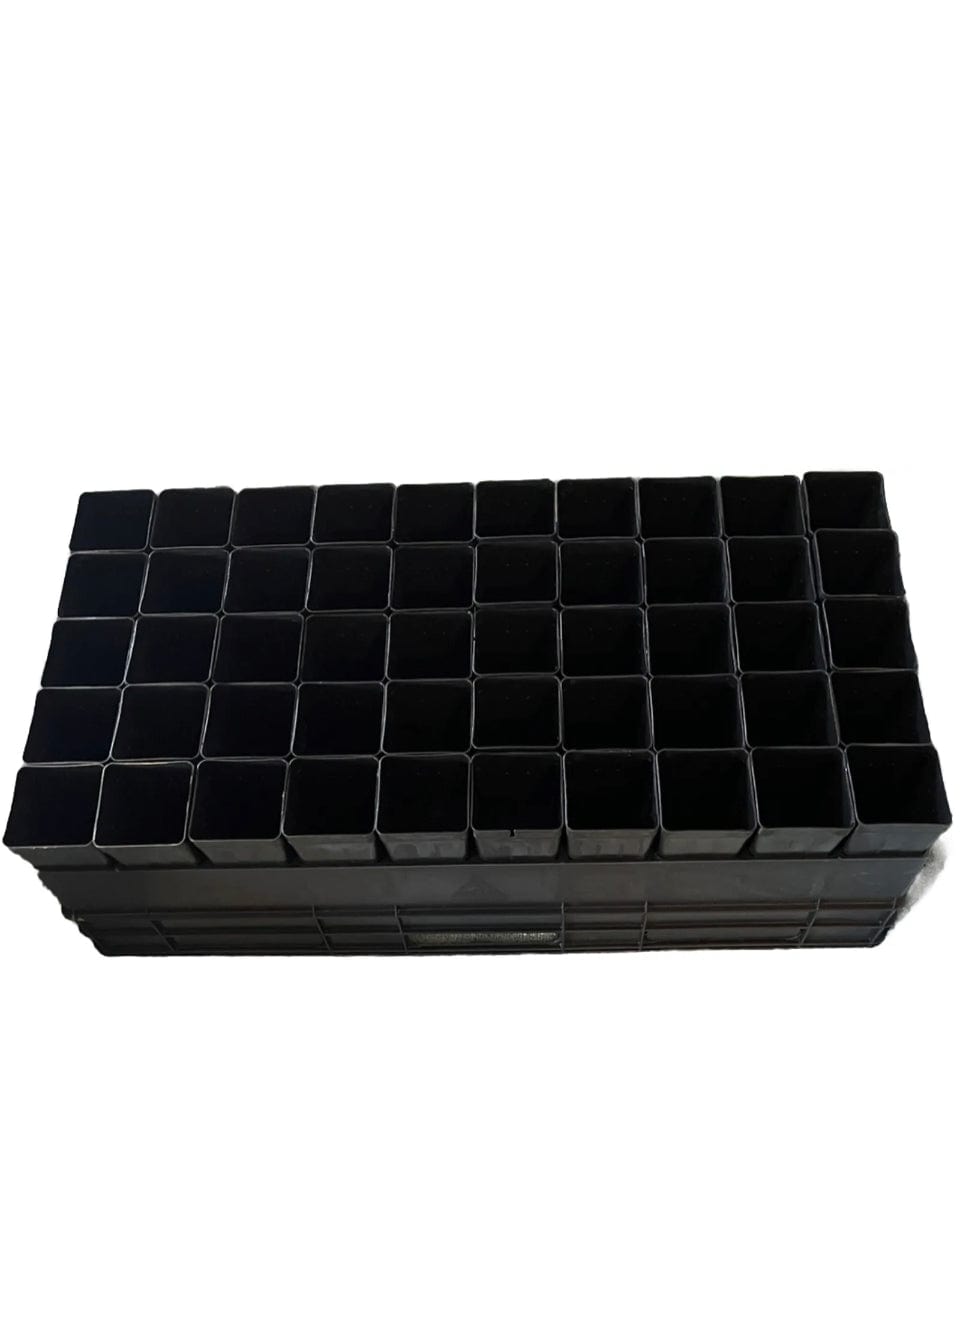 Forestry tube trays for sale online black plastic